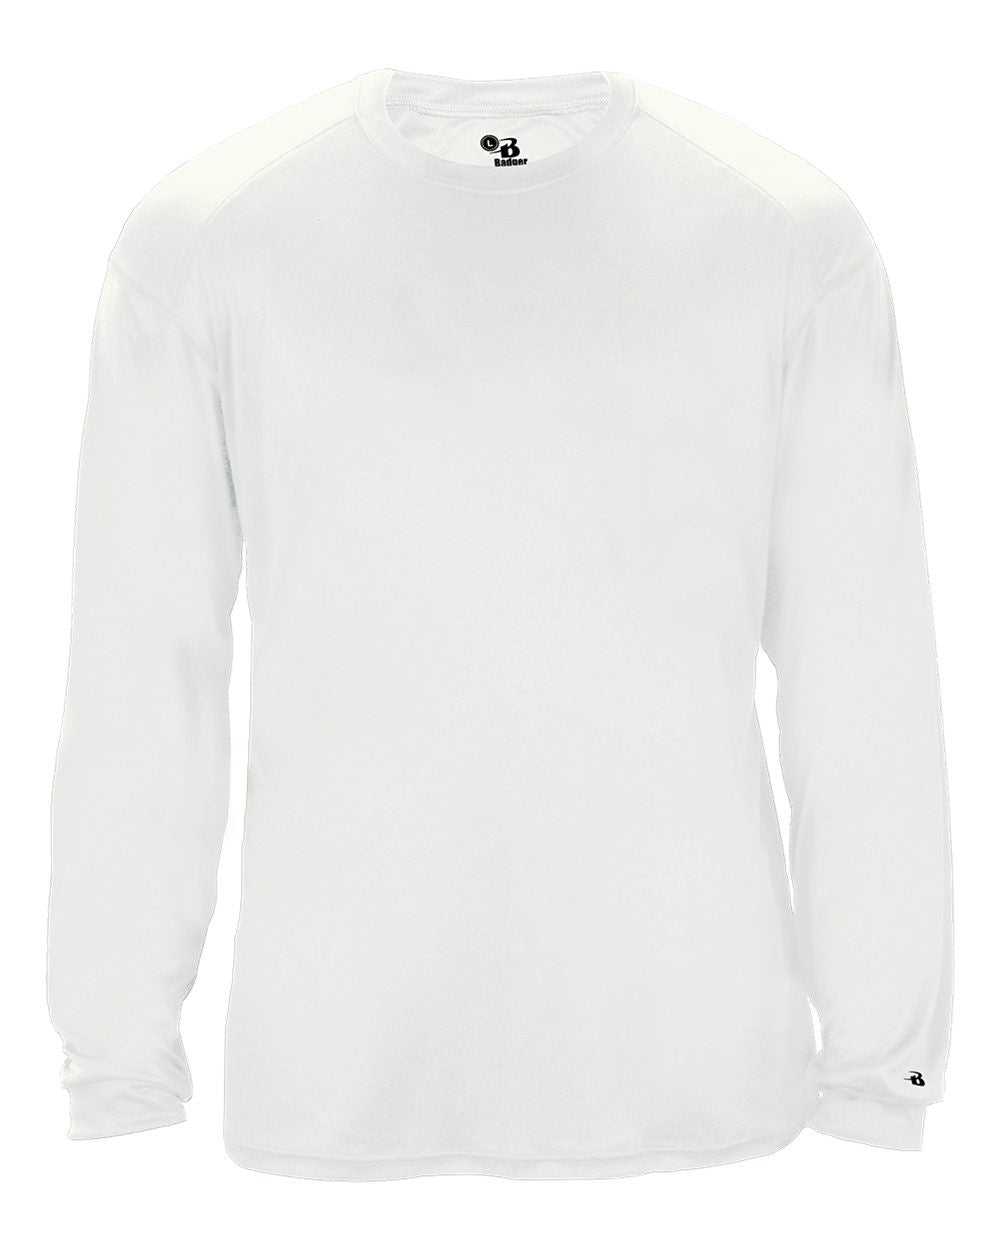 Badger Sport 4004 Ultimate Softlock Long Sleeve Tee - White - HIT a Double - 1